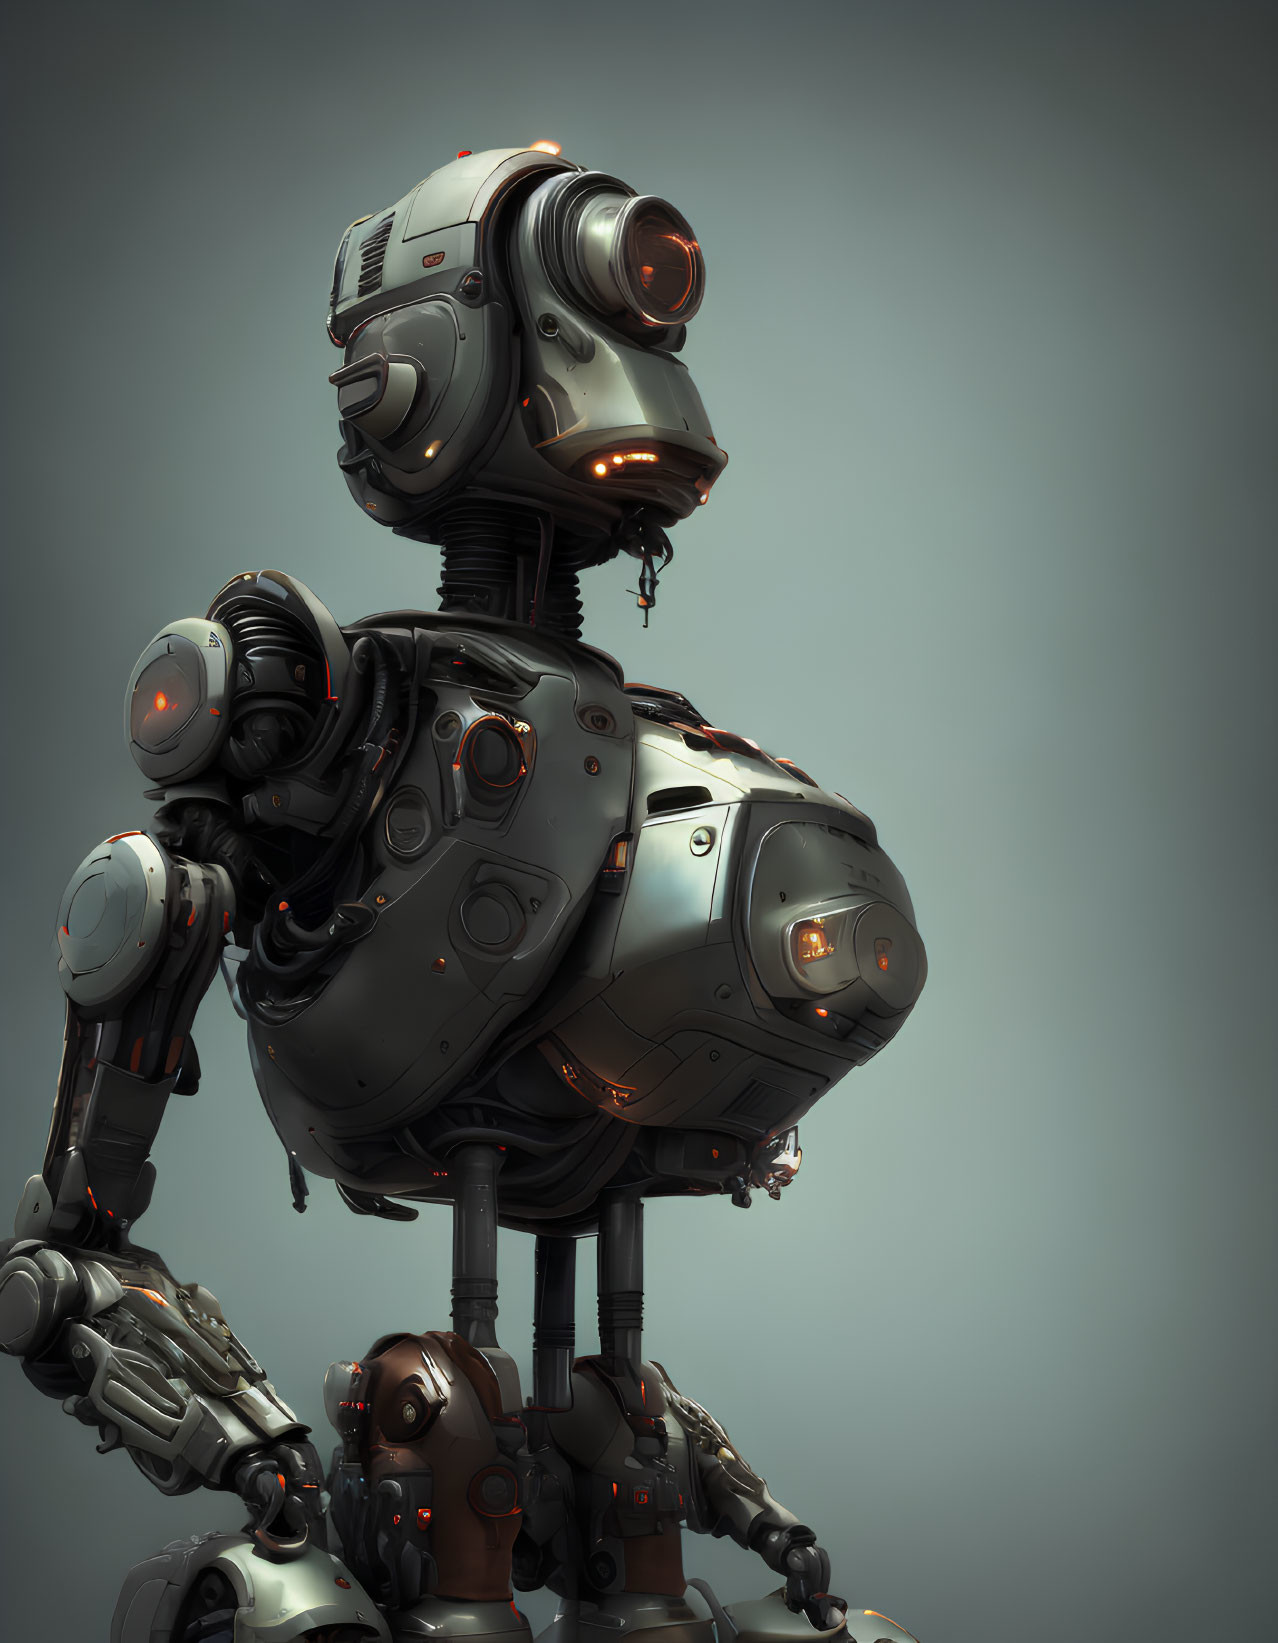 Detailed humanoid robot with camera lens head and mechanical limbs on gray background